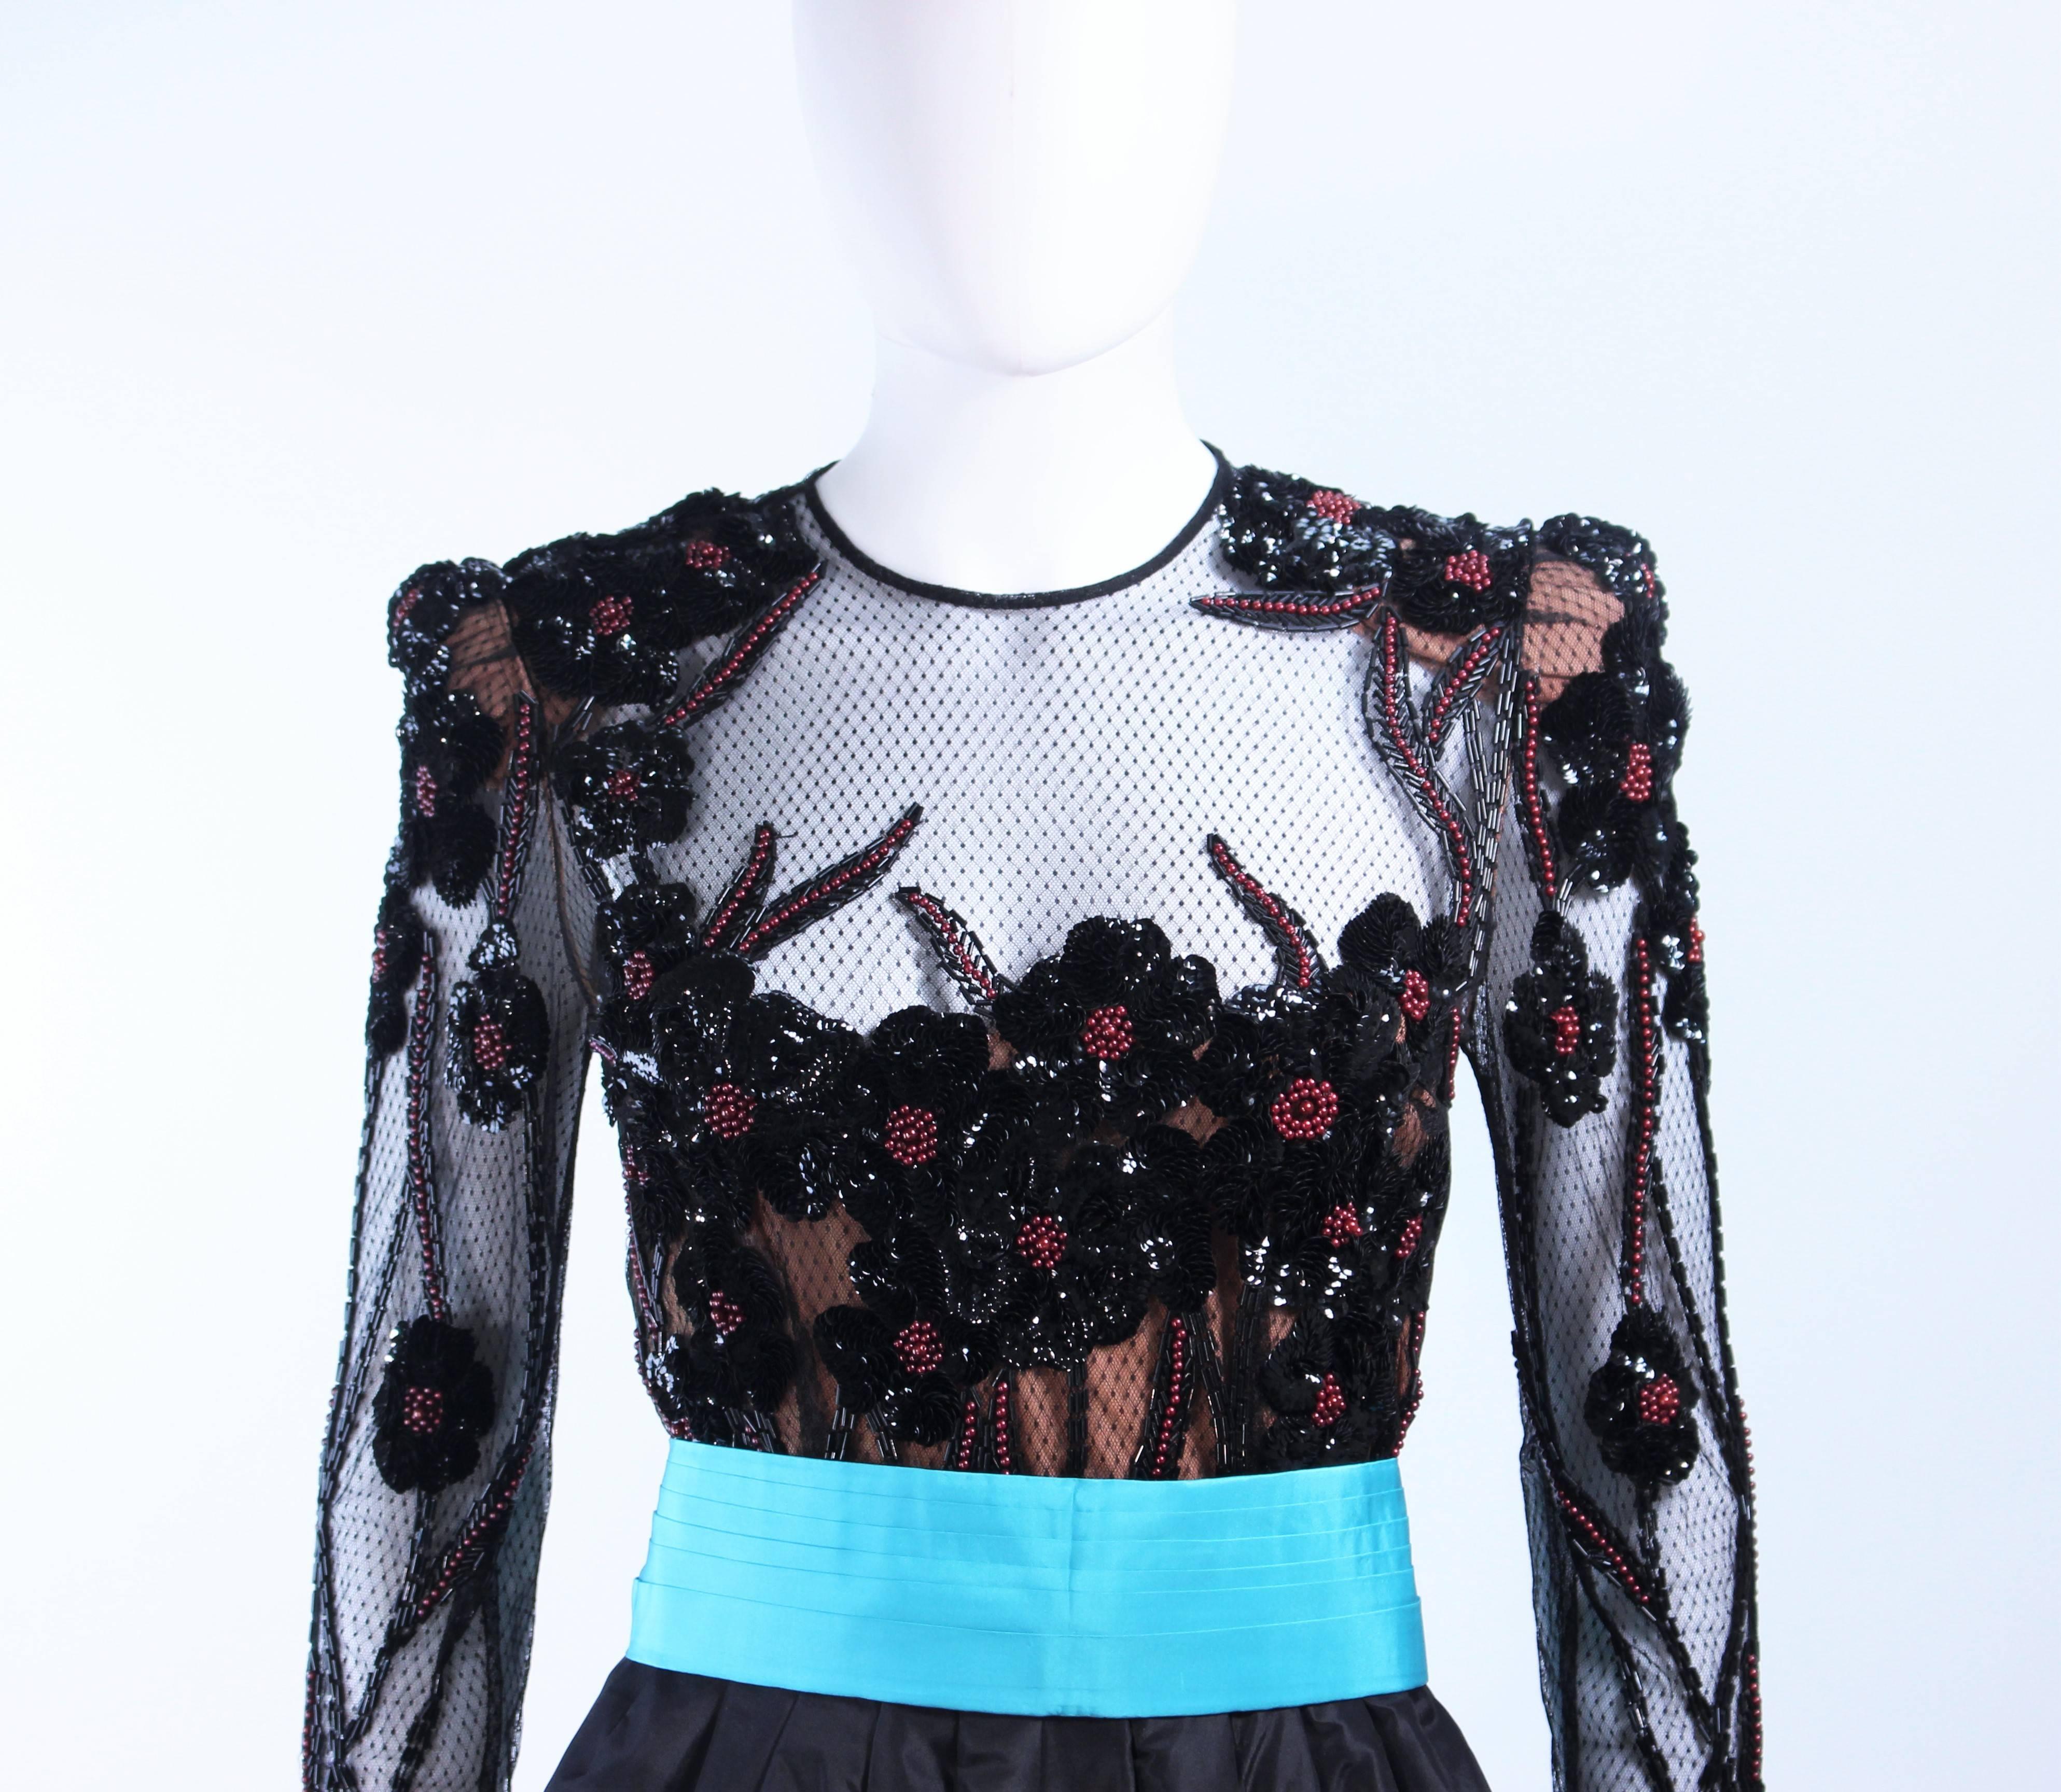 This Paul Louis Orrier cocktail dress is composed of a black silk with sequin applique bodice. Features a silk turquoise belt and skirt interior. there is  a center back zipper closure. In excellent vintage condition.

**Please cross-reference